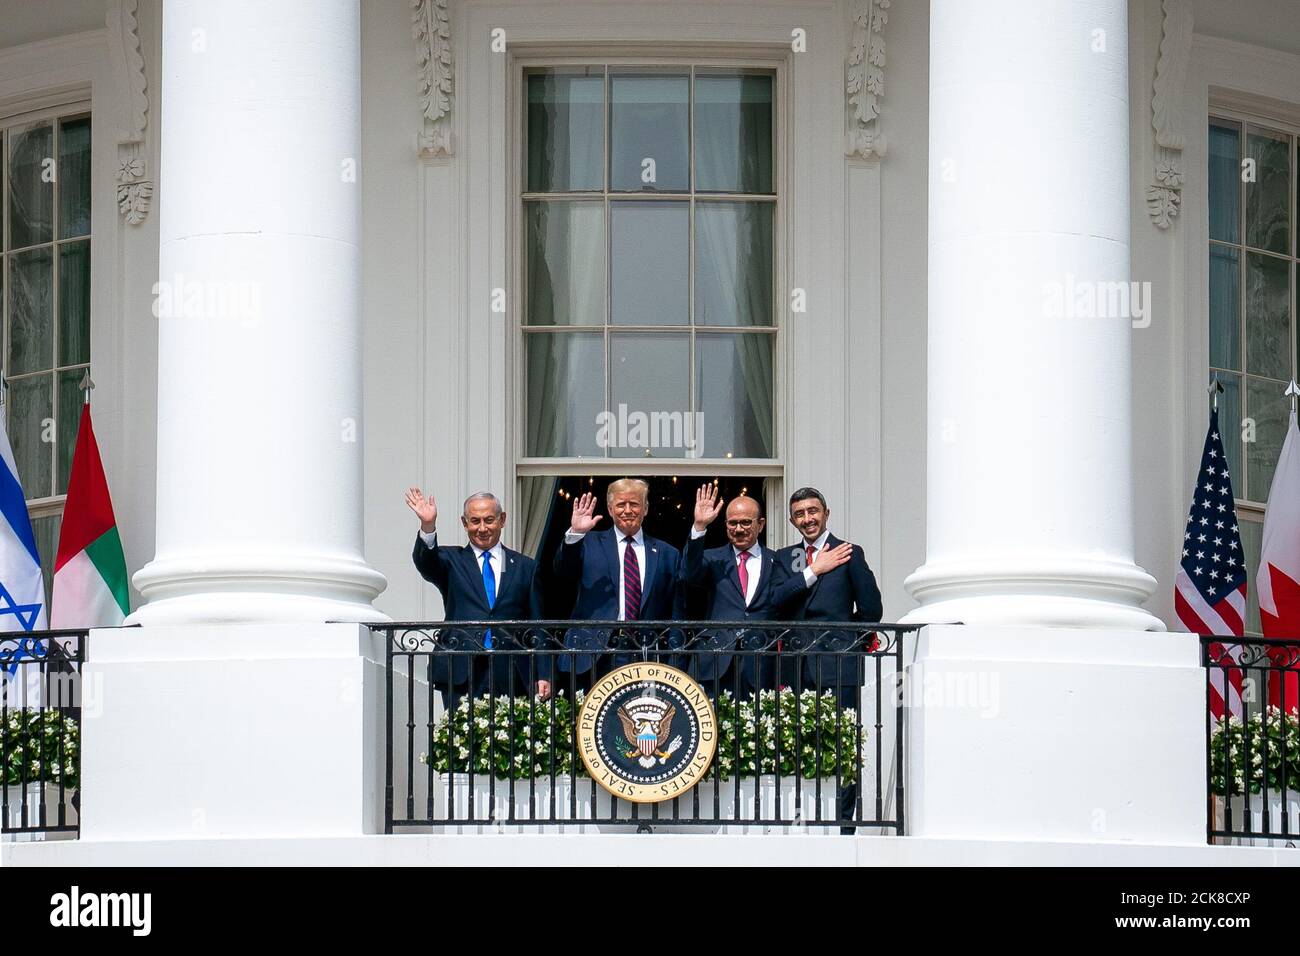 President Donald J. Trump, Minister of Foreign Affairs of Bahrain Dr. Abdullatif bin Rashid Al-Zayani, Israeli Prime Minister Benjamin Netanyahu and Minister of Foreign Affairs for the United Arab Emirates Abdullah bin Zayed Al Nahyanisigns wave from the Blue Room balcony during the Abraham Accords signing Tuesday, September 15, 2020, at the White House. (USA) Stock Photo